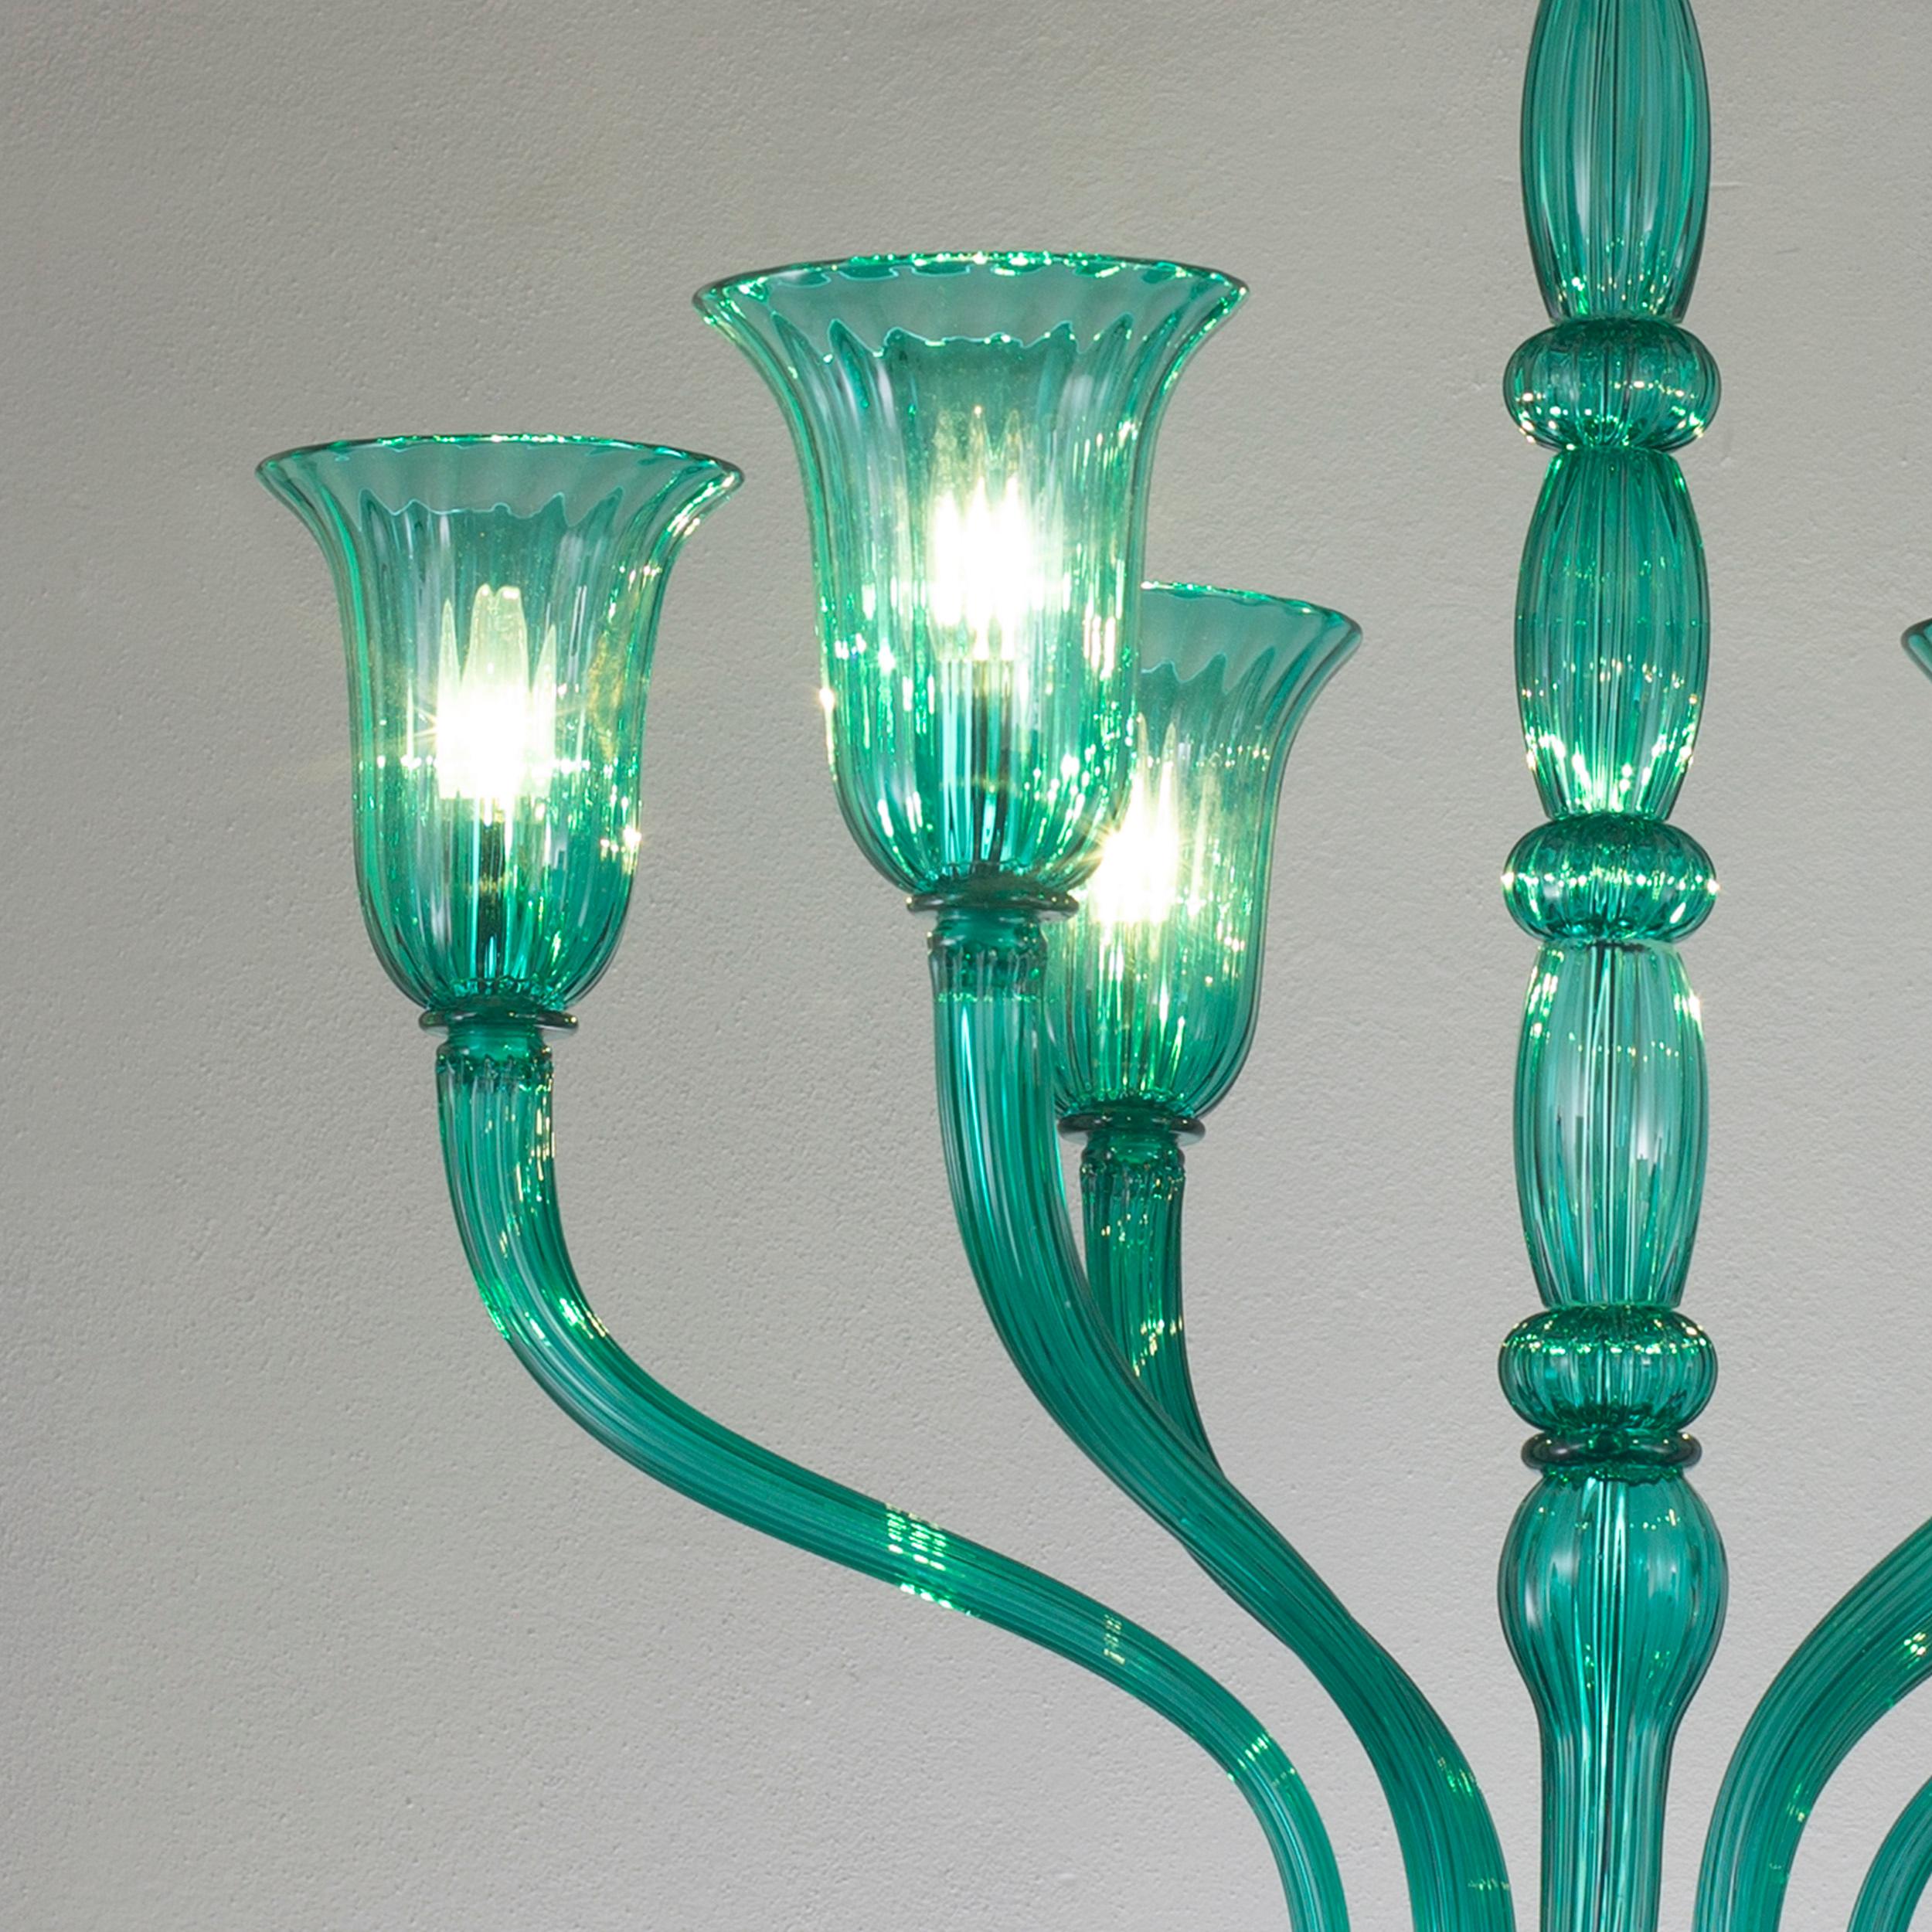 21st Century Chandelier 6arms marine green Murano Glass by Multiforme  In Excellent Condition For Sale In Trebaseleghe, IT